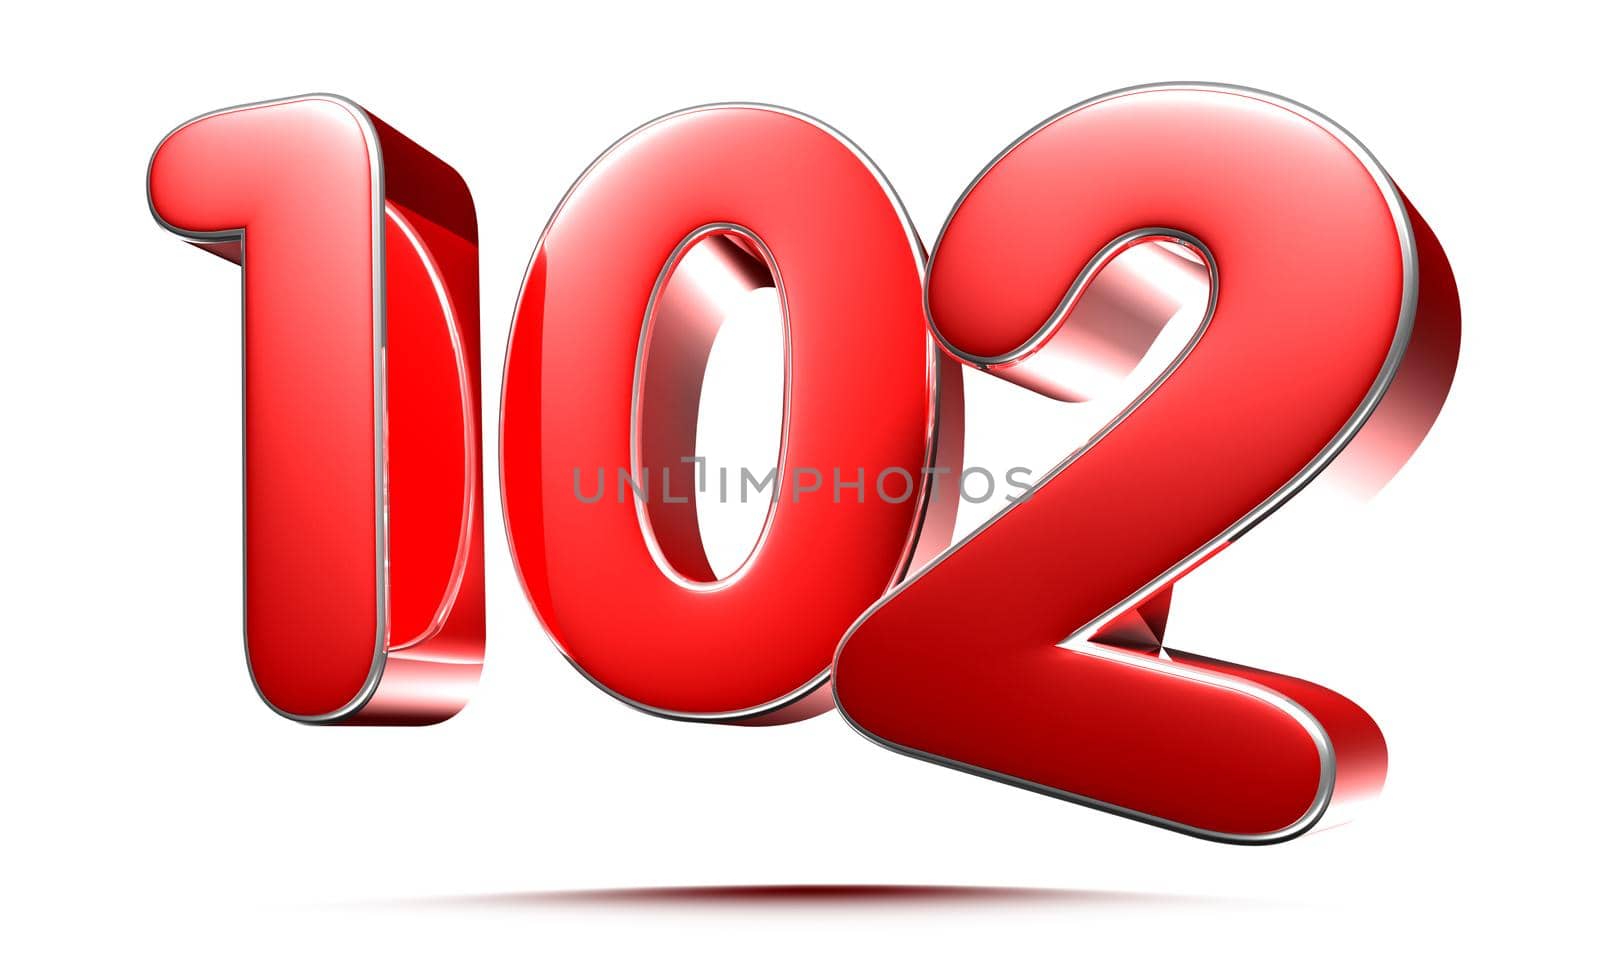 Rounded red numbers 102 on white background 3D illustration with clipping path by thitimontoyai